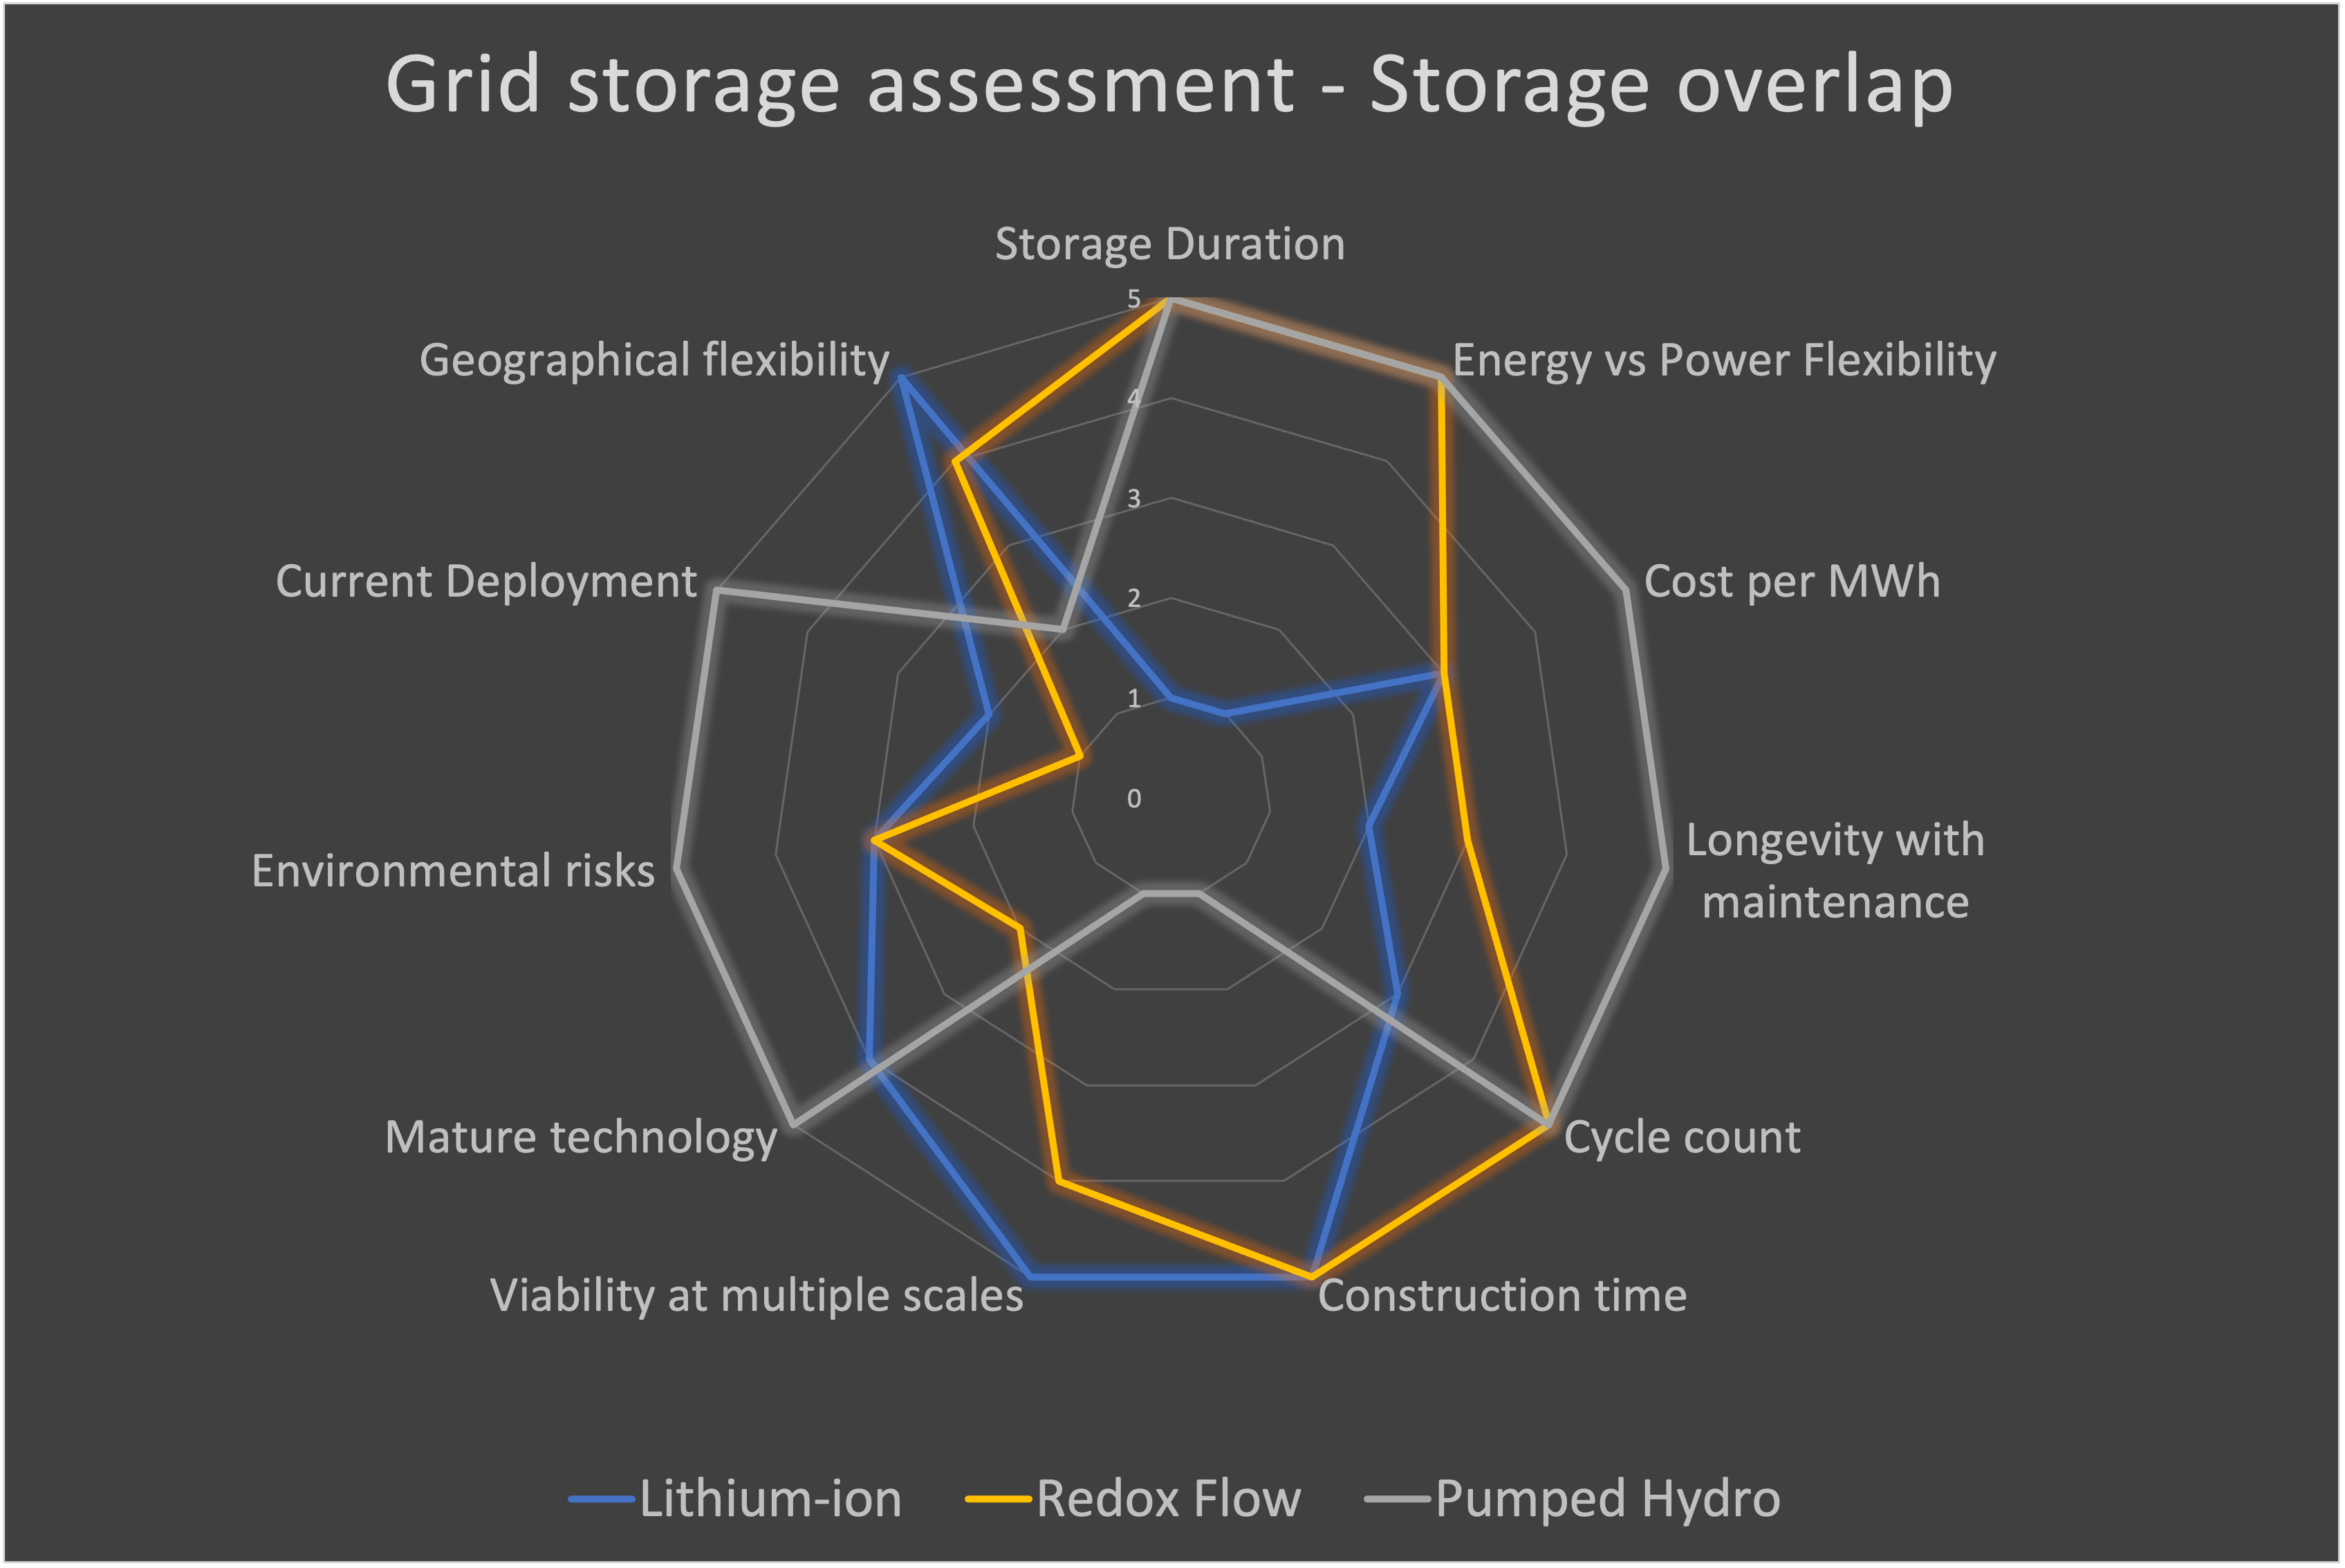 Radar diagram of major decision factors which support a mix of pumped hydro, redox flow and lithium ion grid storage by author